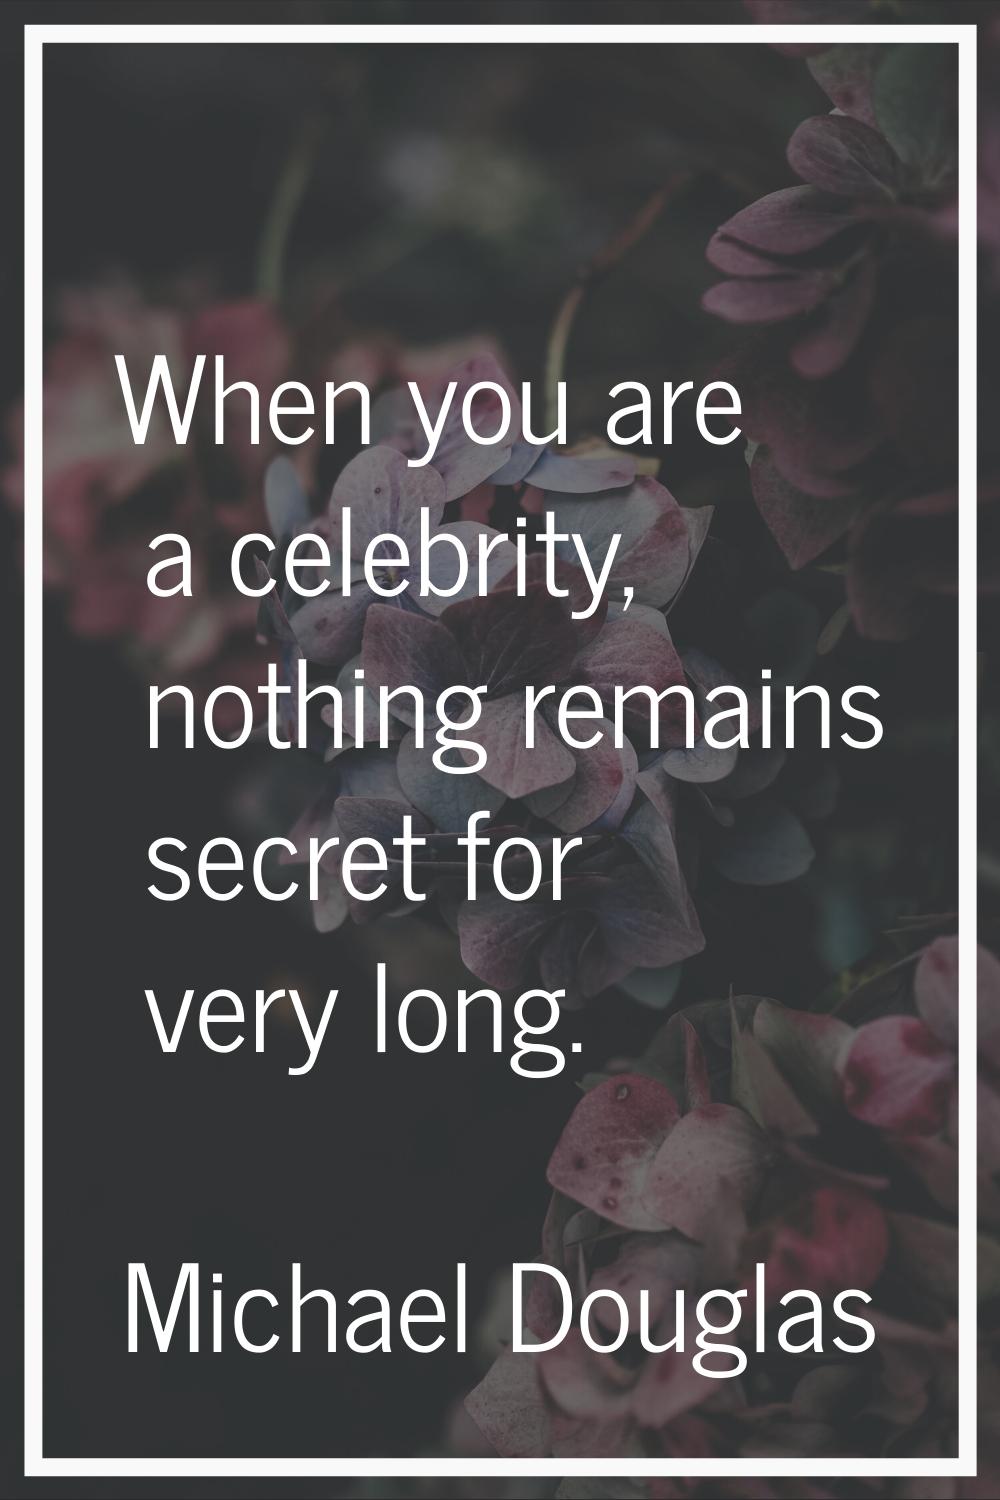 When you are a celebrity, nothing remains secret for very long.